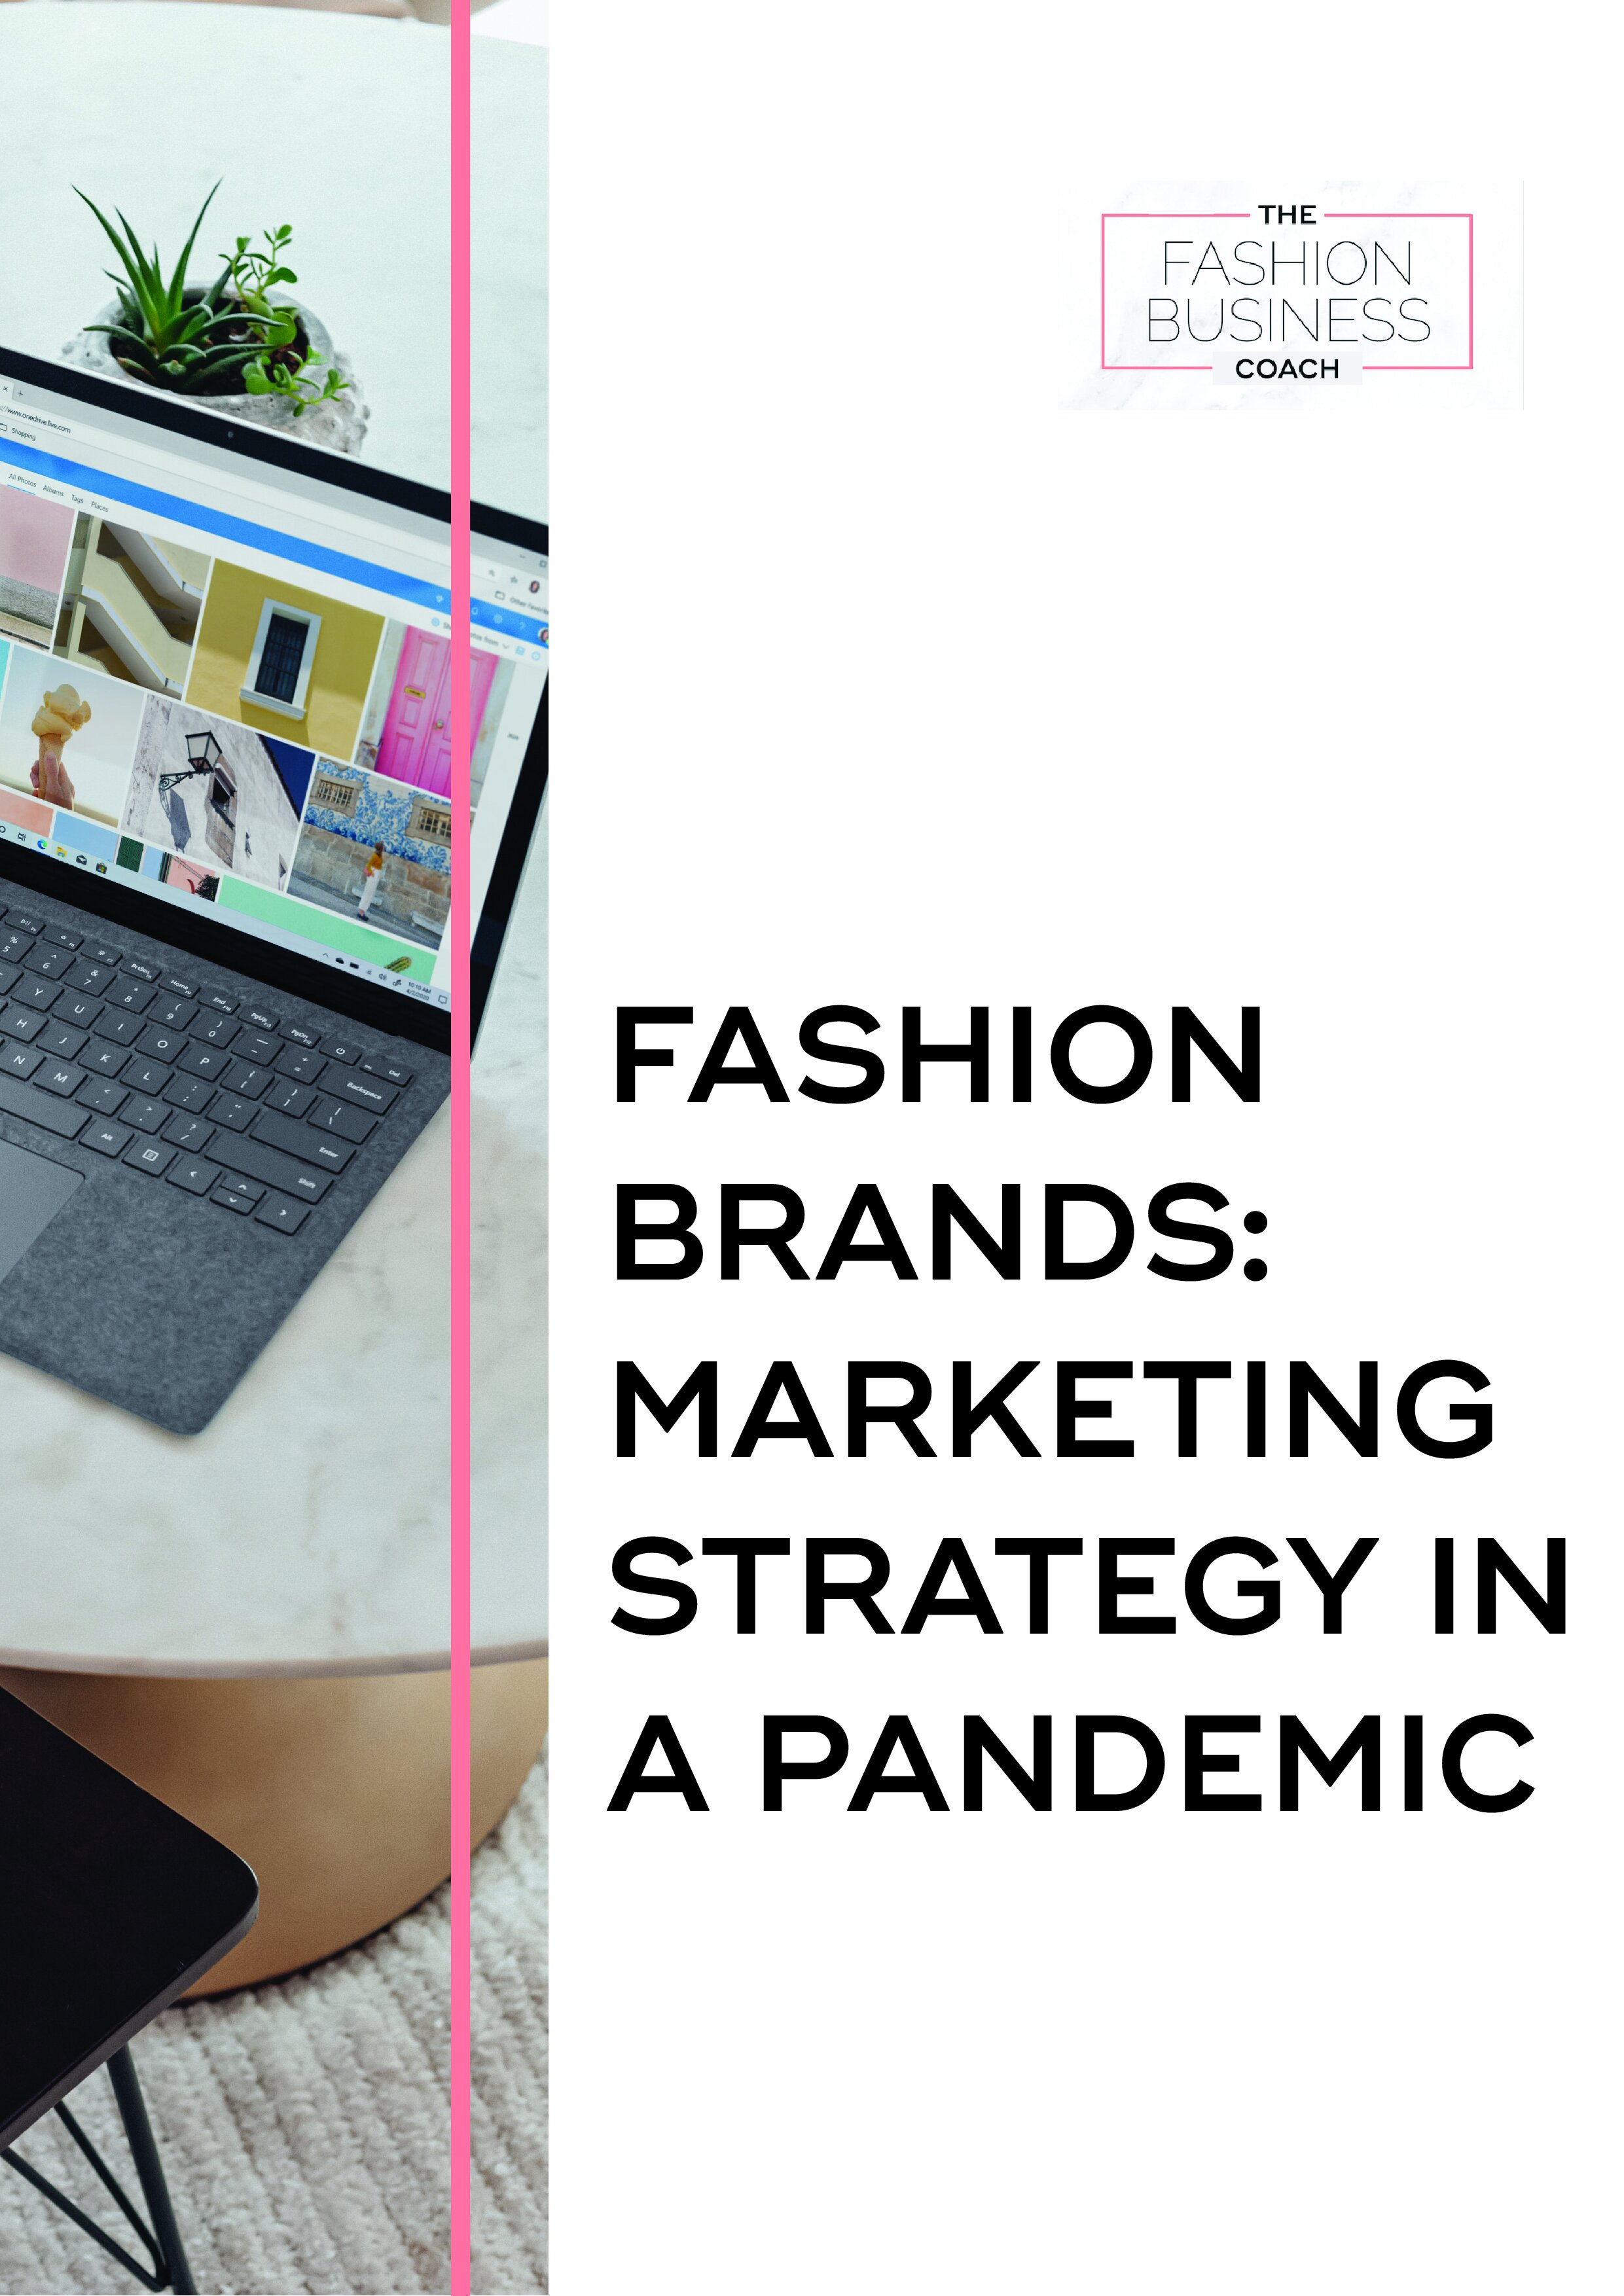 Fashion Brands Marketing Strategy in a Pandemic 1.jpg